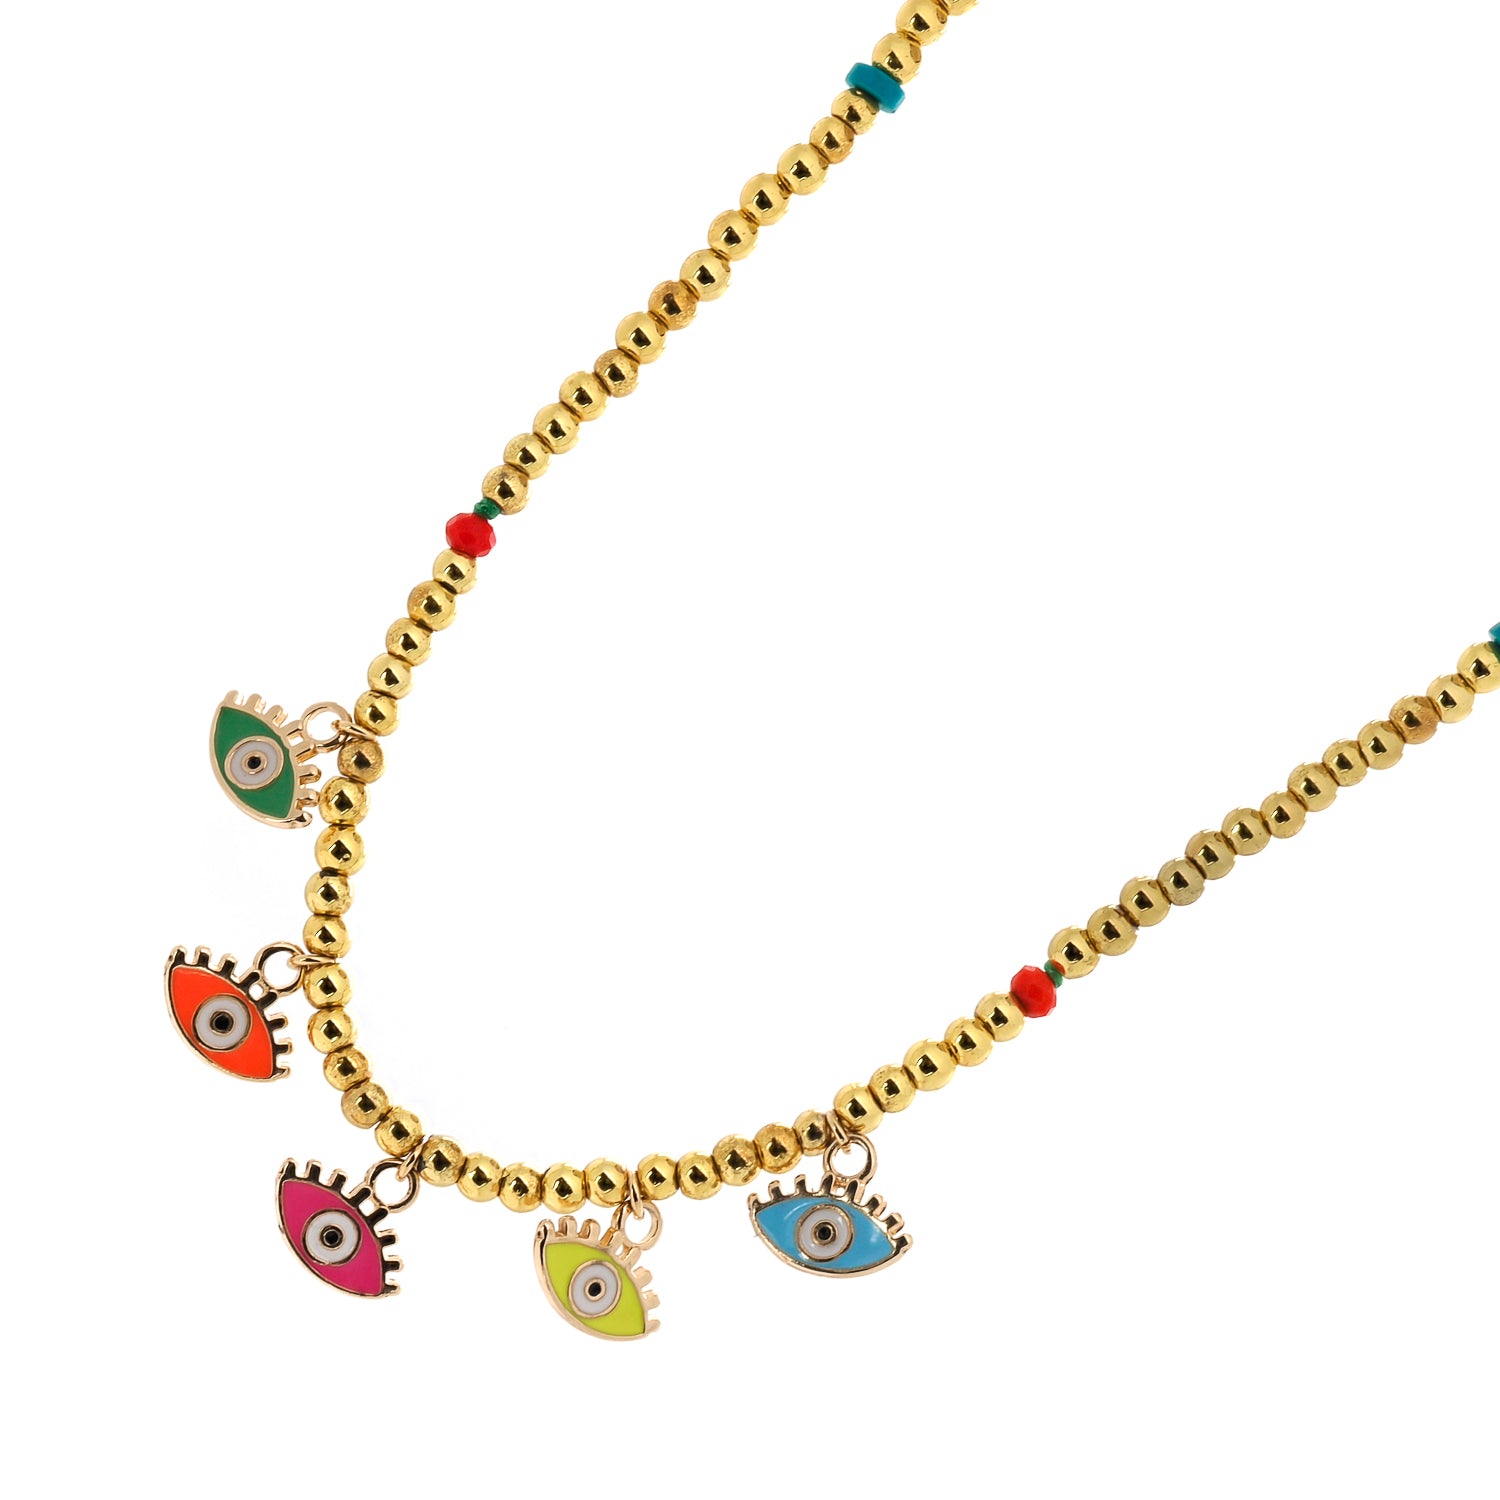 The Power Of Colors Evil Eye Gold Beaded Choker Necklace